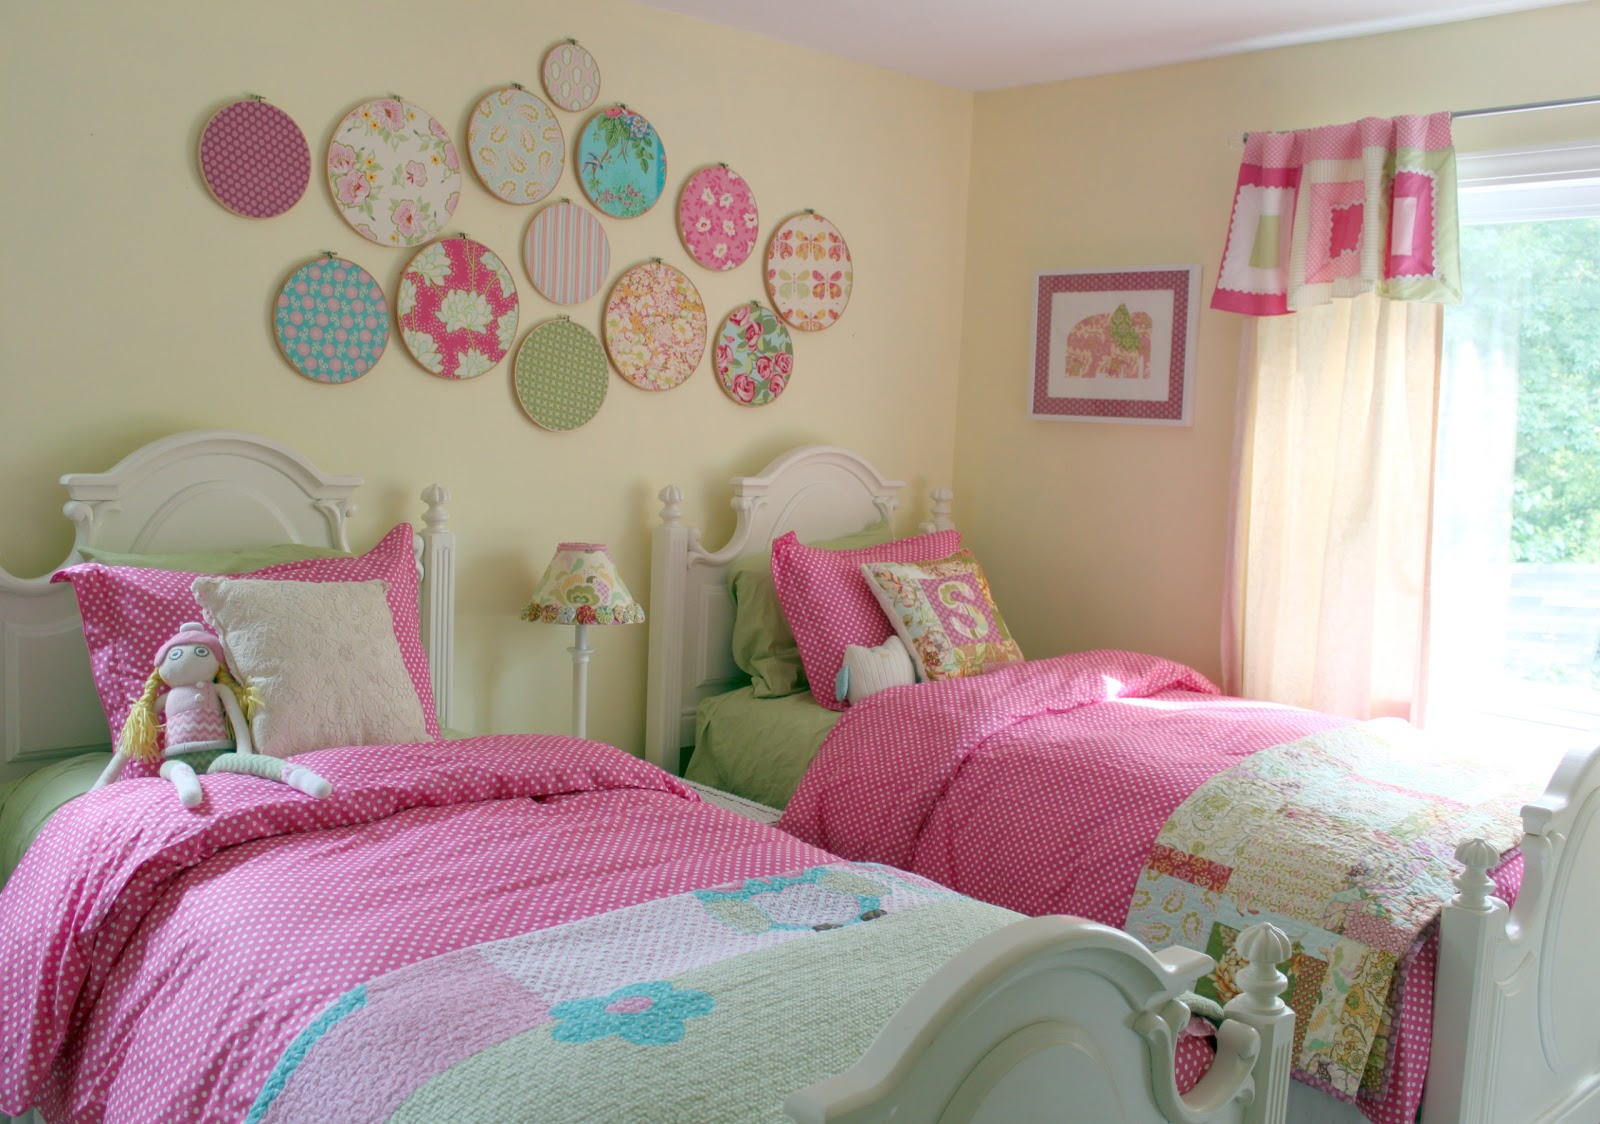 Pottery Barn Kids - Wondering how to create a shared kids room